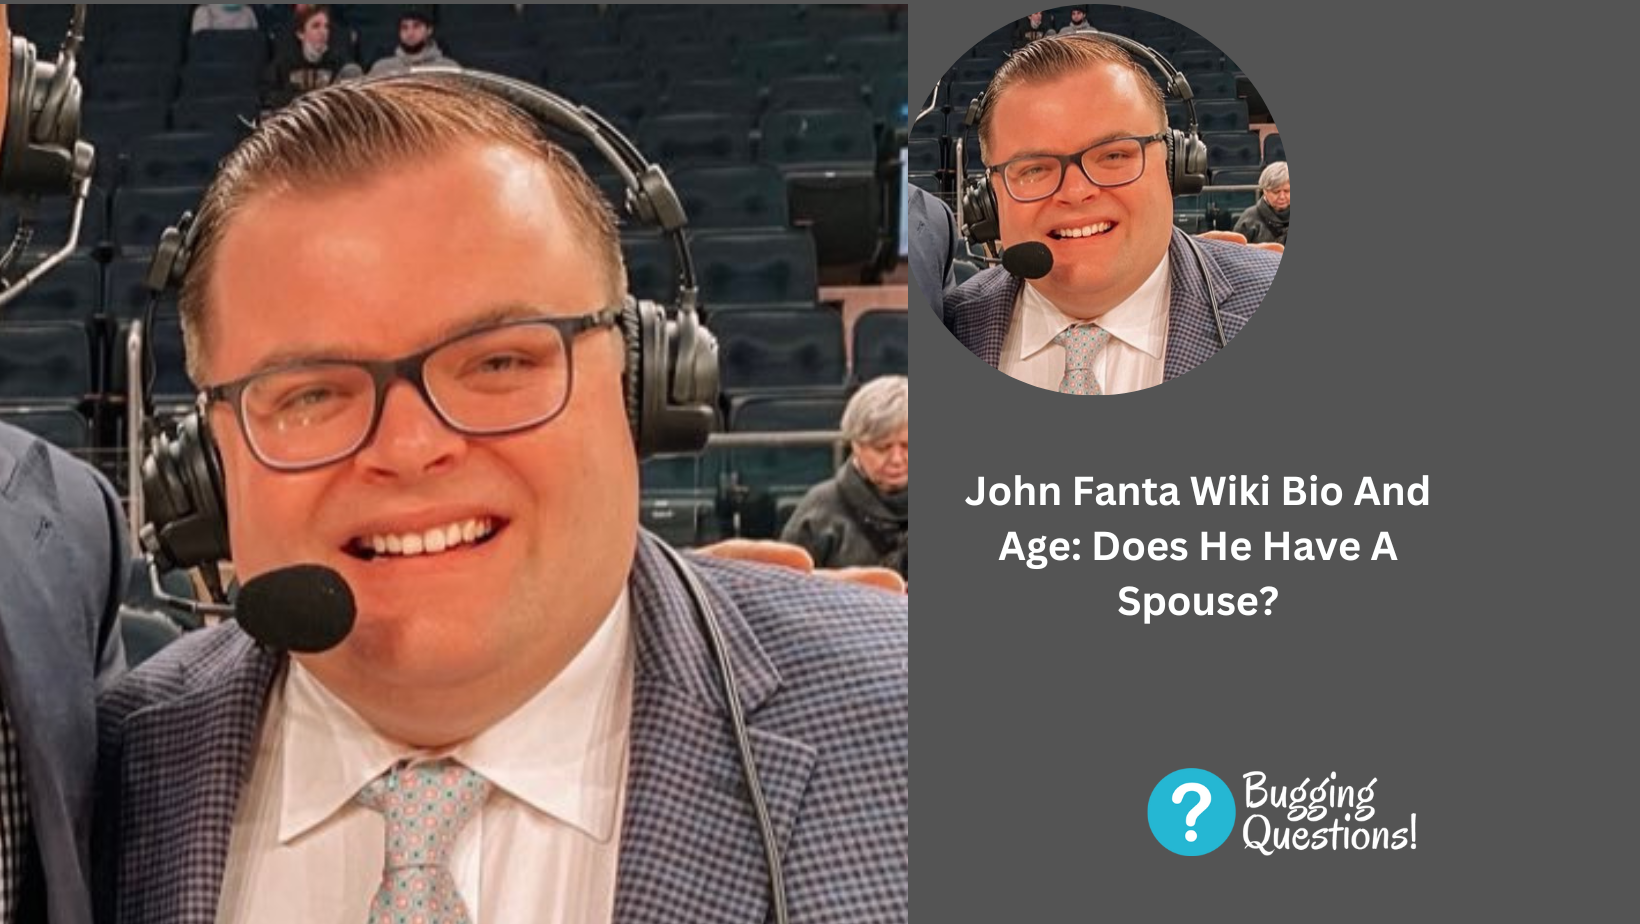 John Fanta Wiki Bio And Age: Does He Have A Spouse?